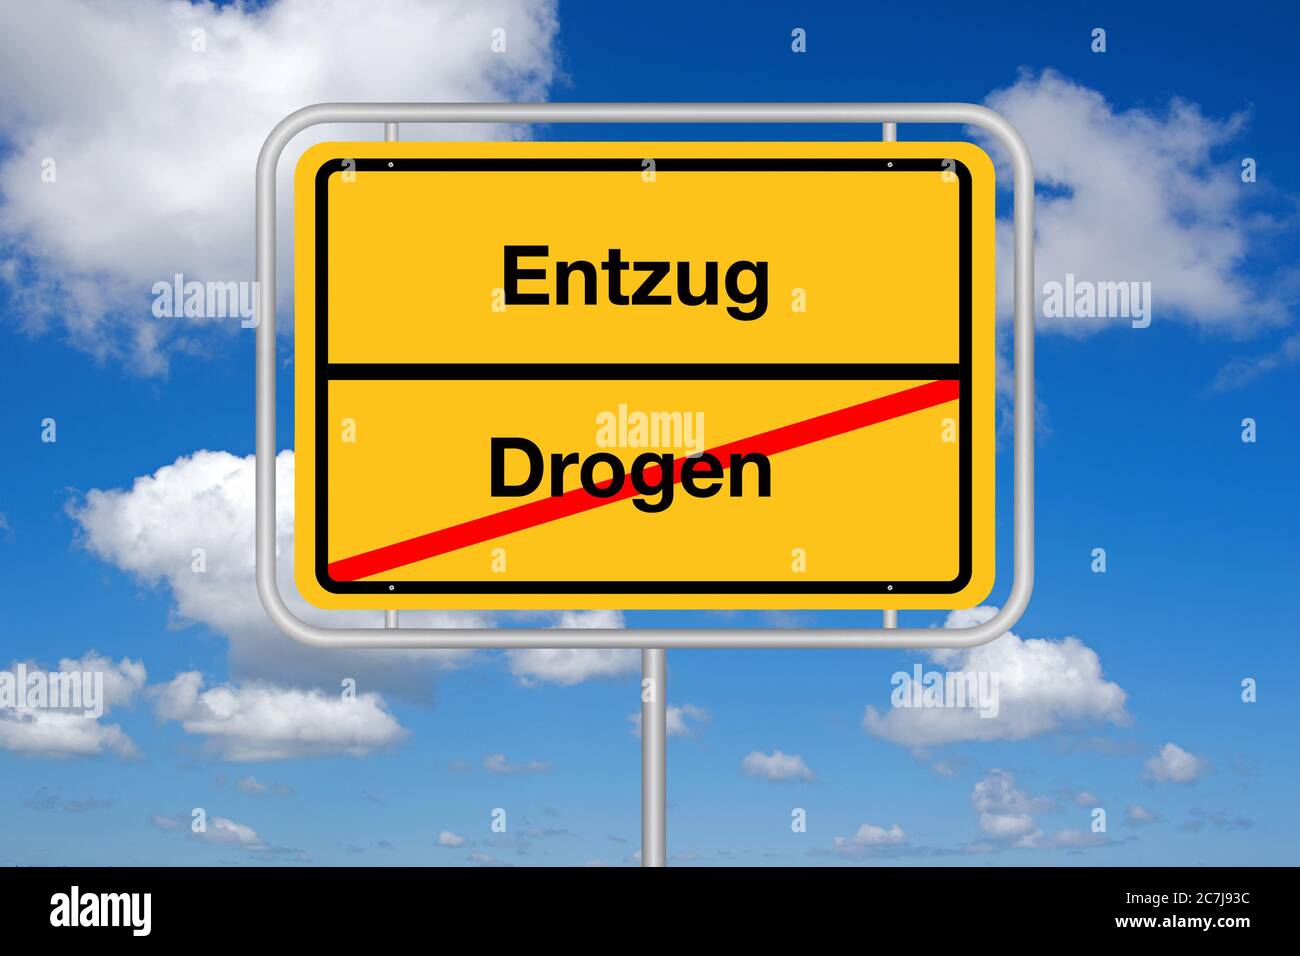 city limit sign Entzug - Drogen, withdrawal - drugs, Germany Stock Photo